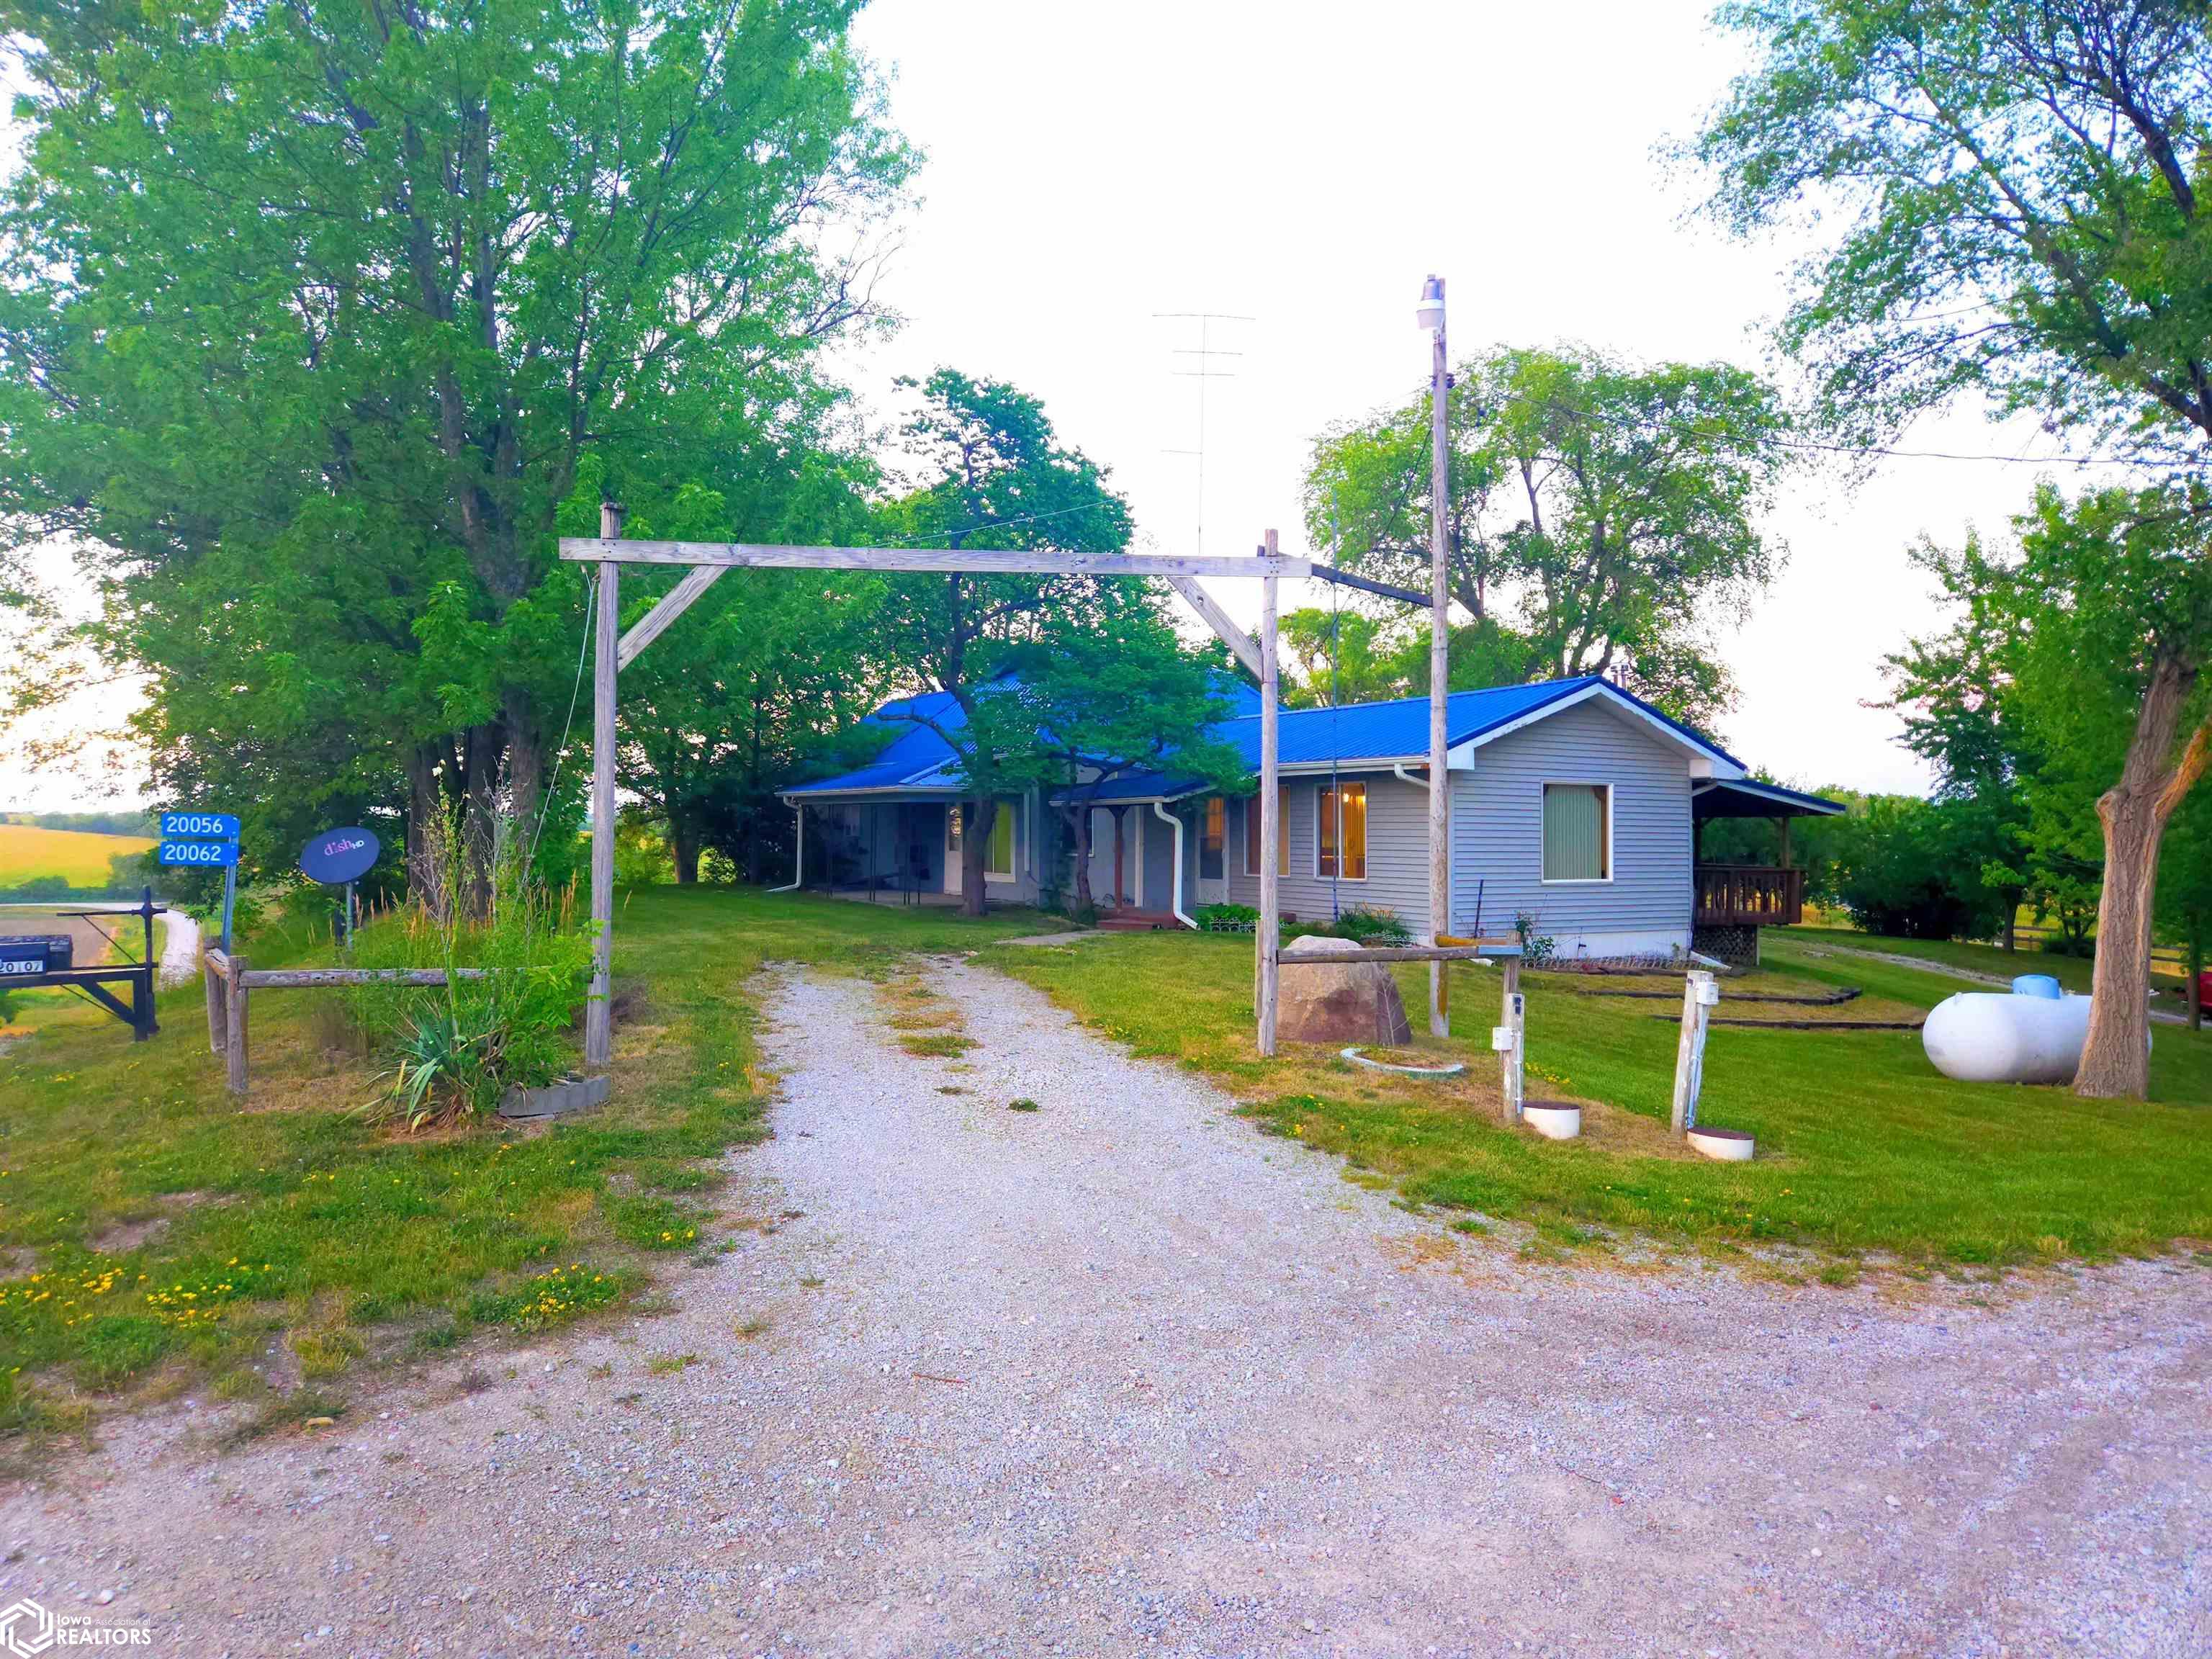 20056 212th Ave, Leon, Iowa 50144, 3 Bedrooms Bedrooms, ,1 BathroomBathrooms,Farm,For Sale,212th Ave,6309361